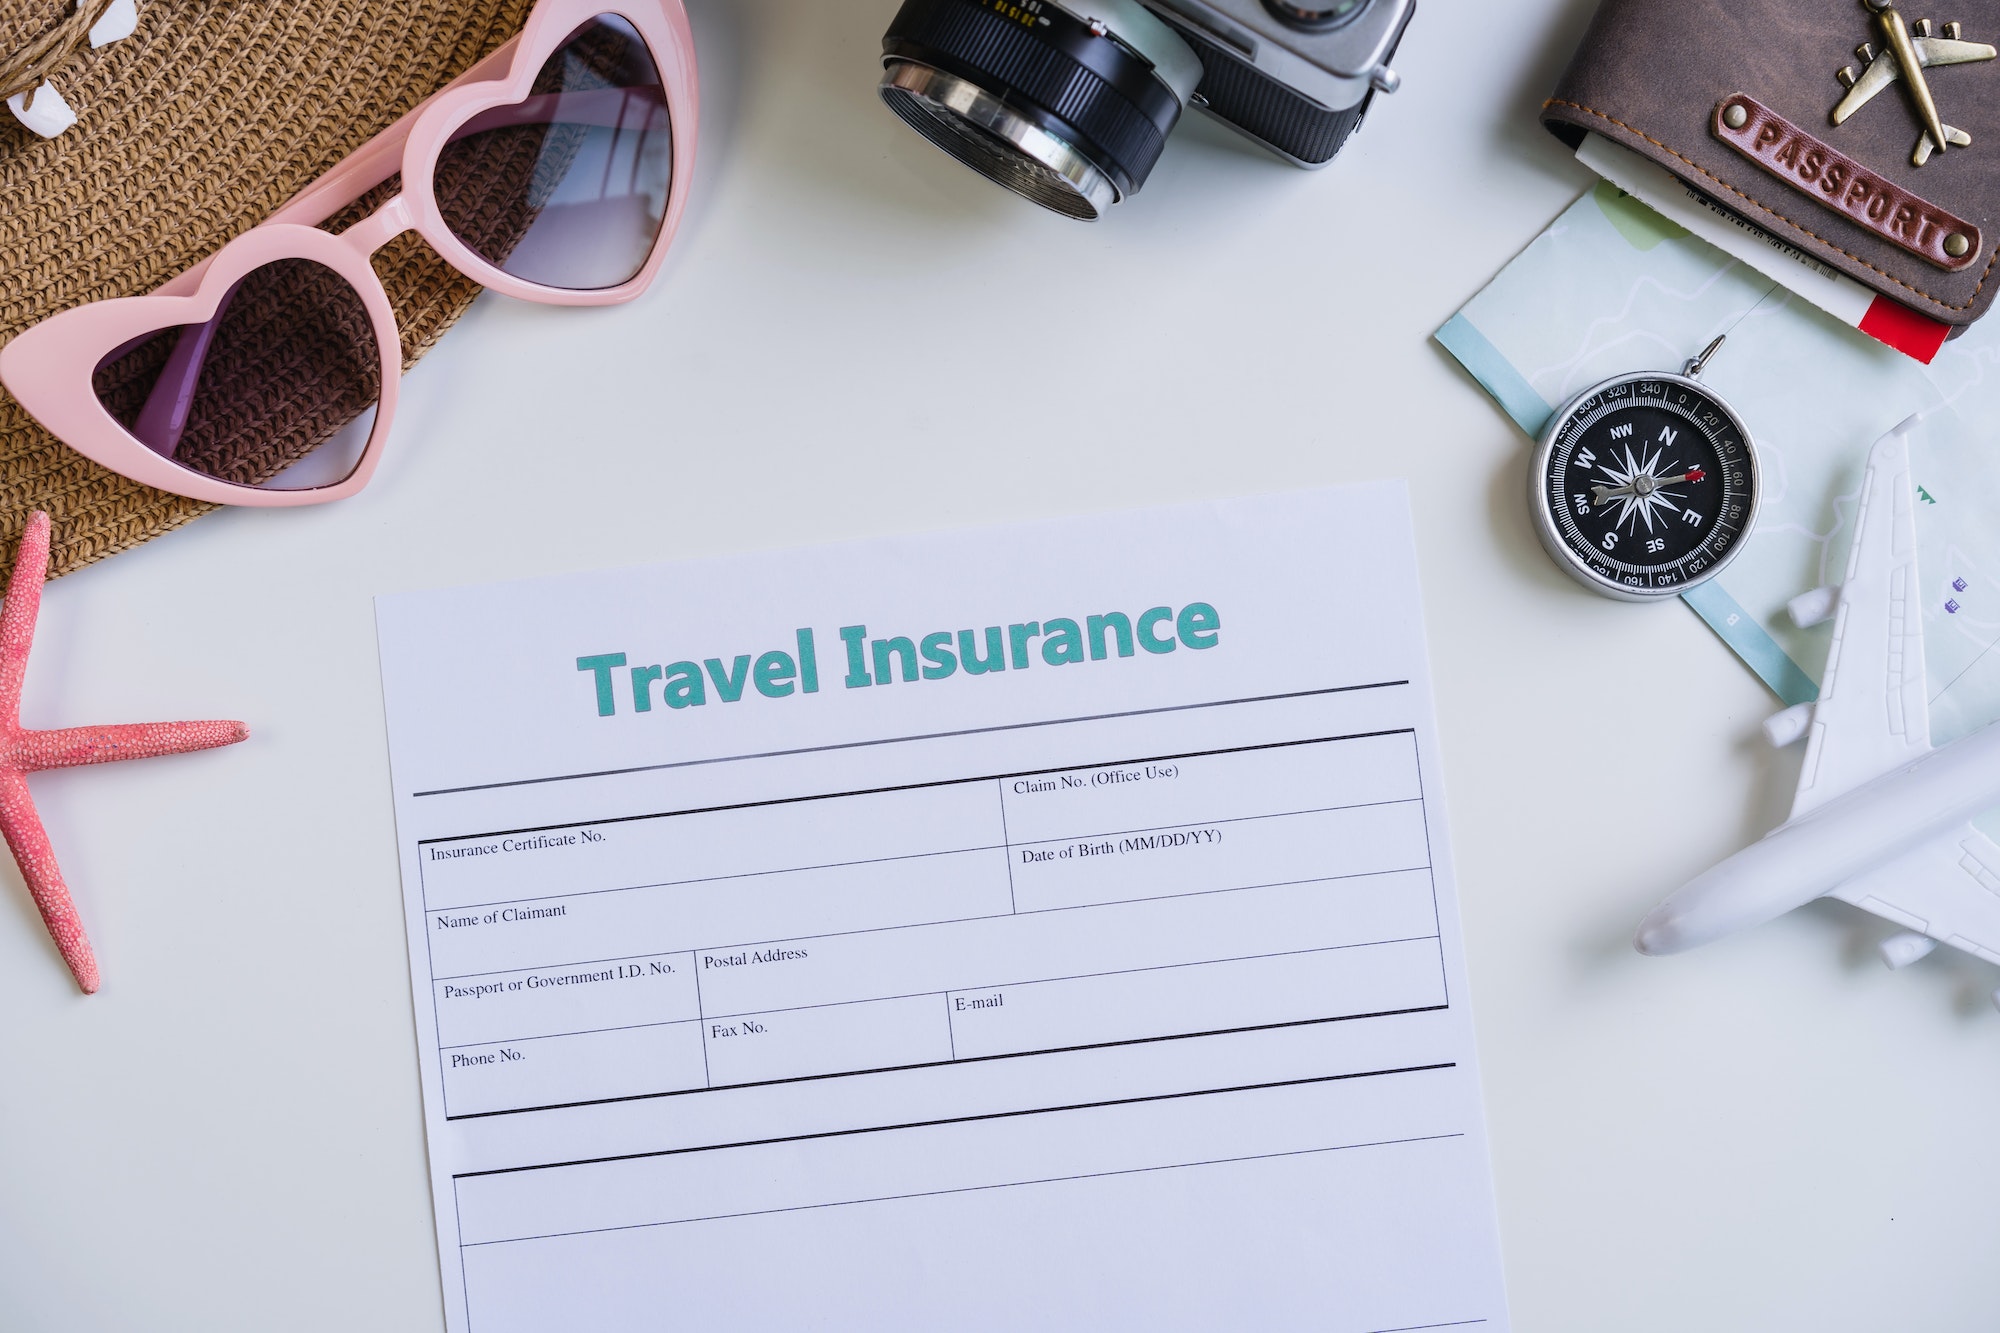 Travel accessories and items with Travel insurance application form